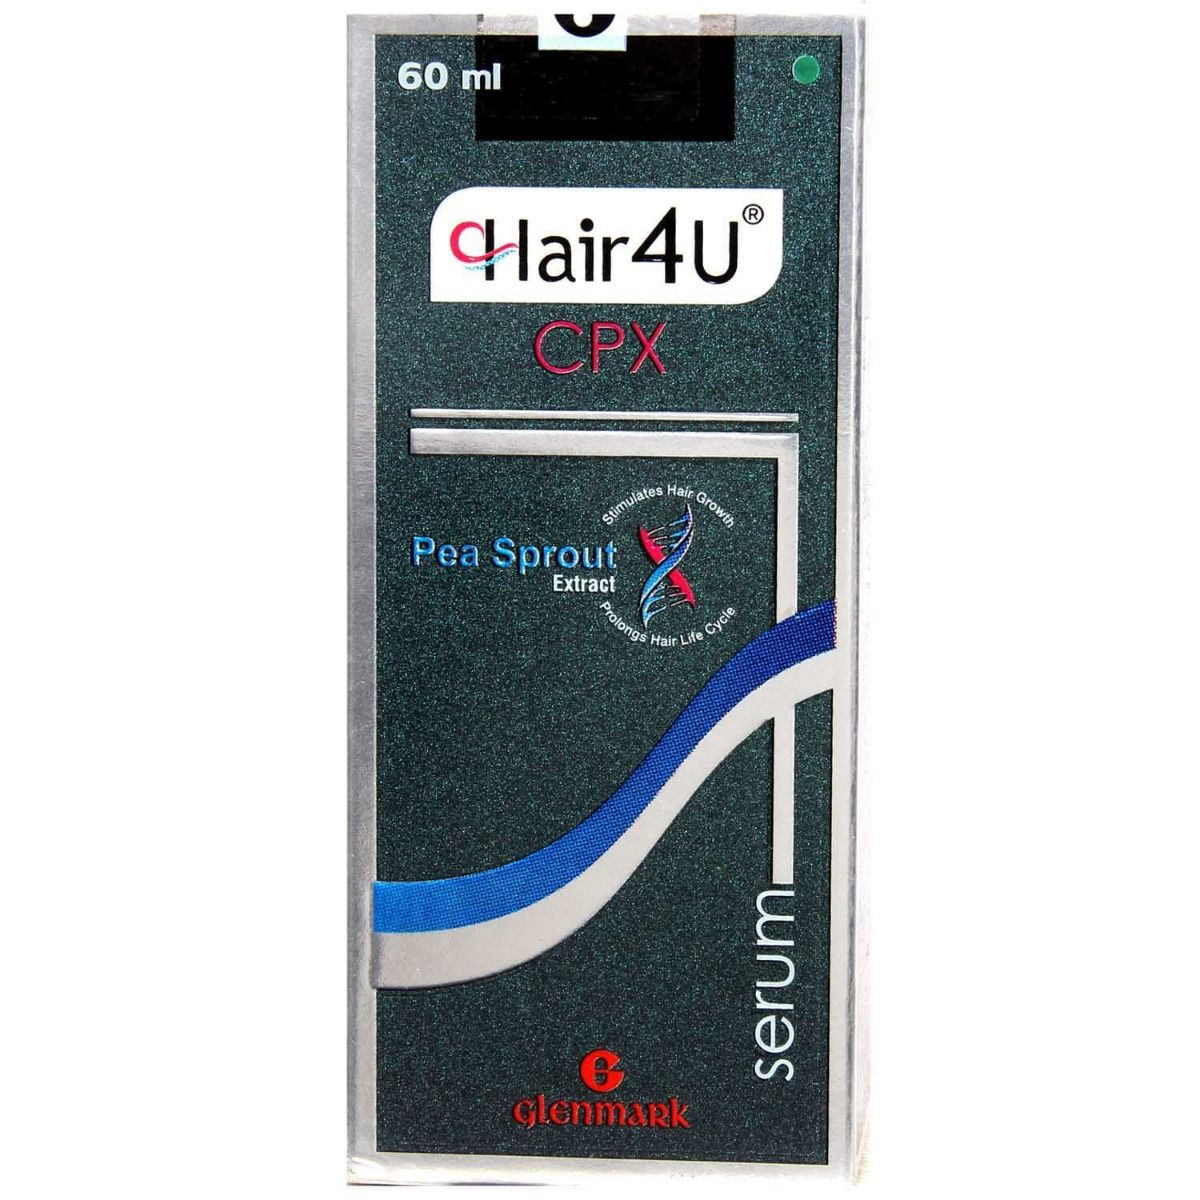 Hair 4U Cpx Serum 60 ml Price, Uses, Side Effects, Composition - Apollo  Pharmacy